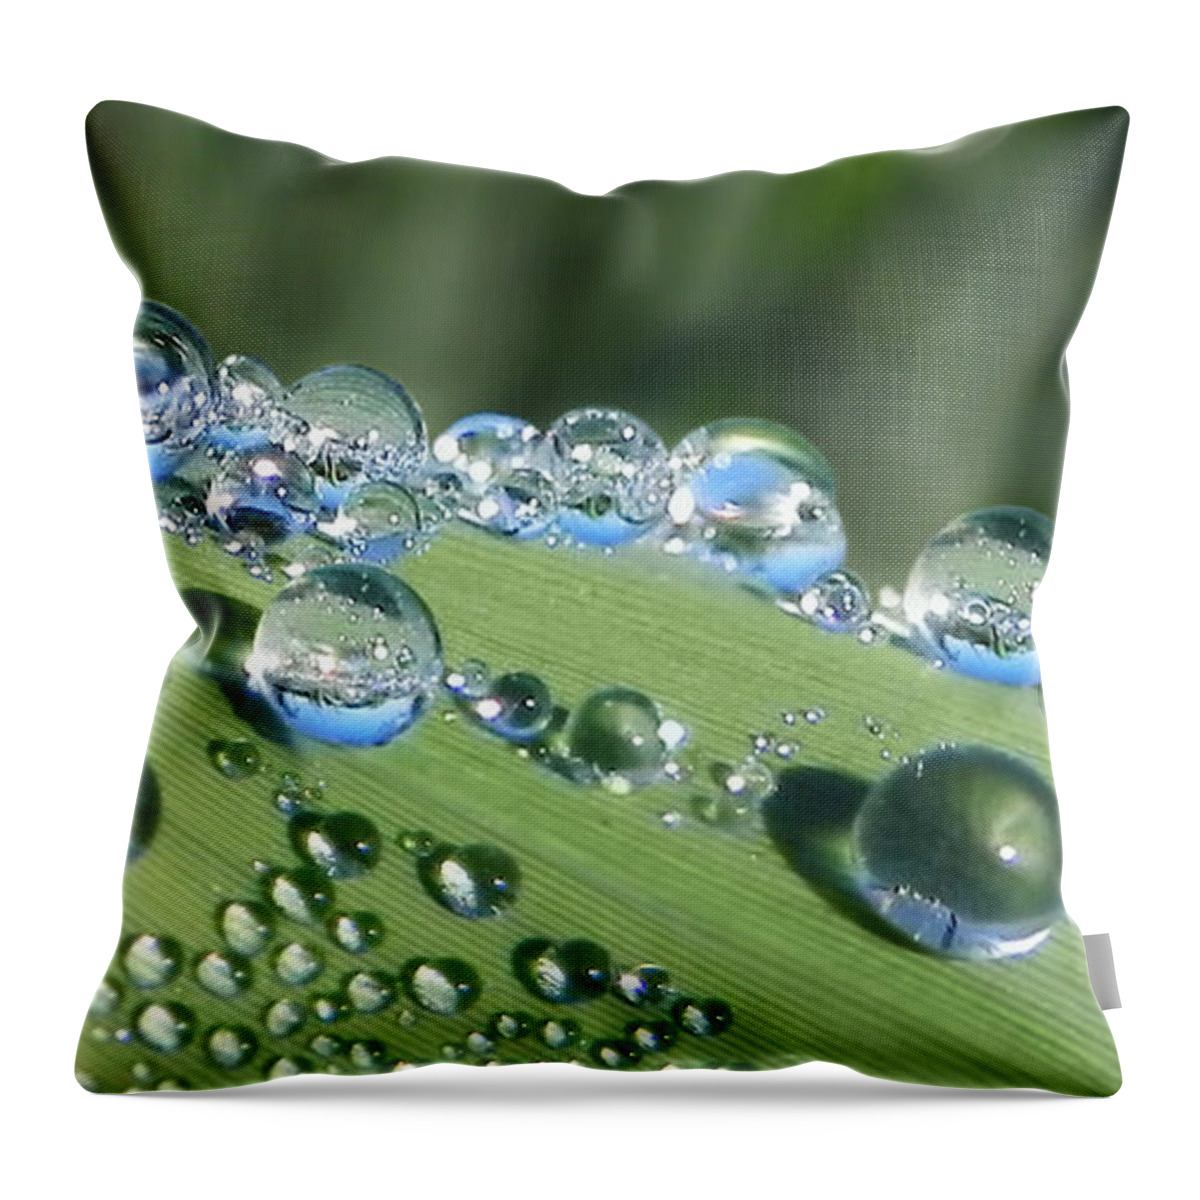 Beads Throw Pillow featuring the photograph Dew Beads by Frances Miller